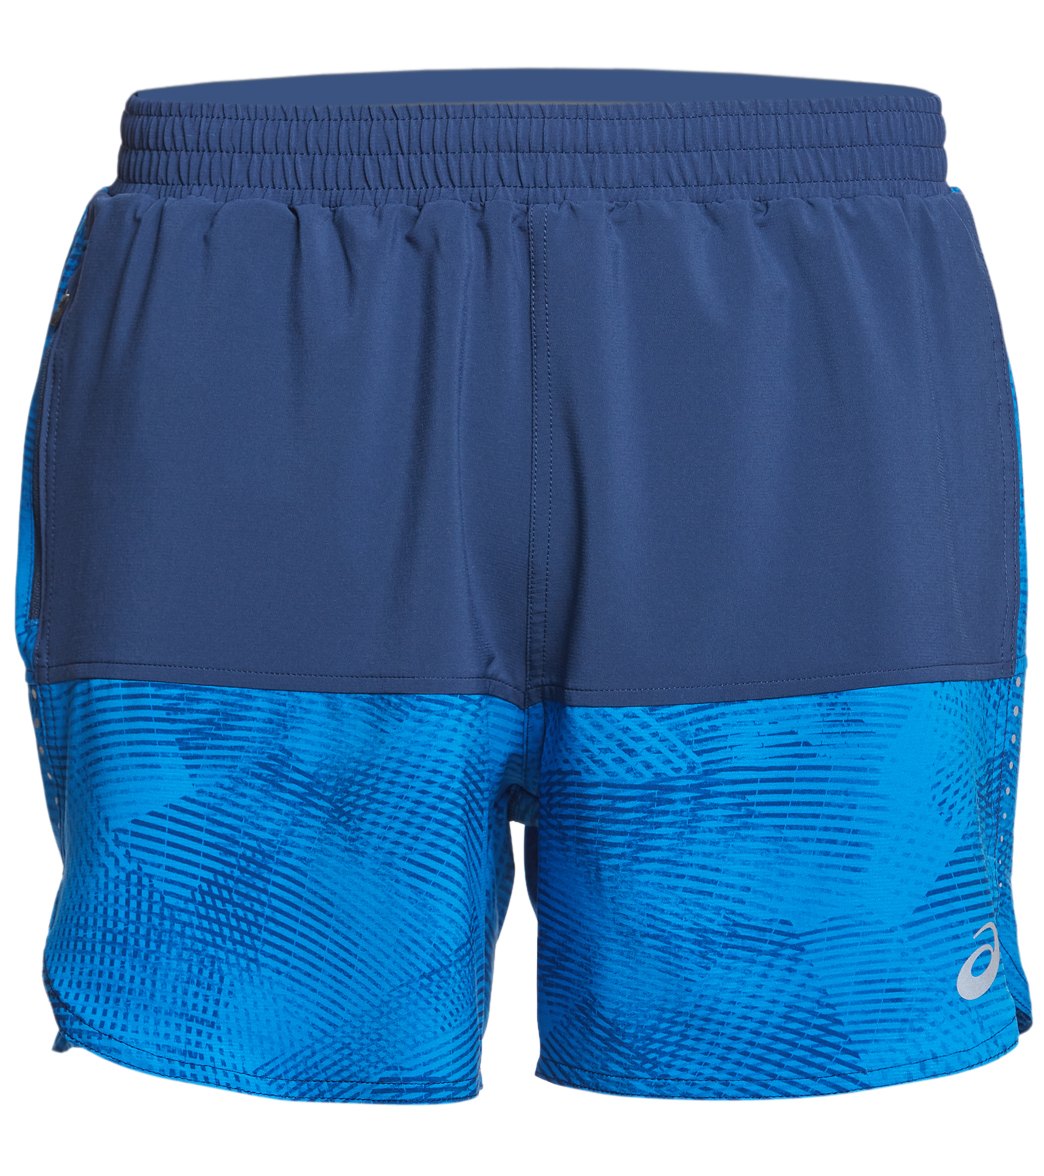 Asics Men's Everyday Short 5in at SwimOutlet.com